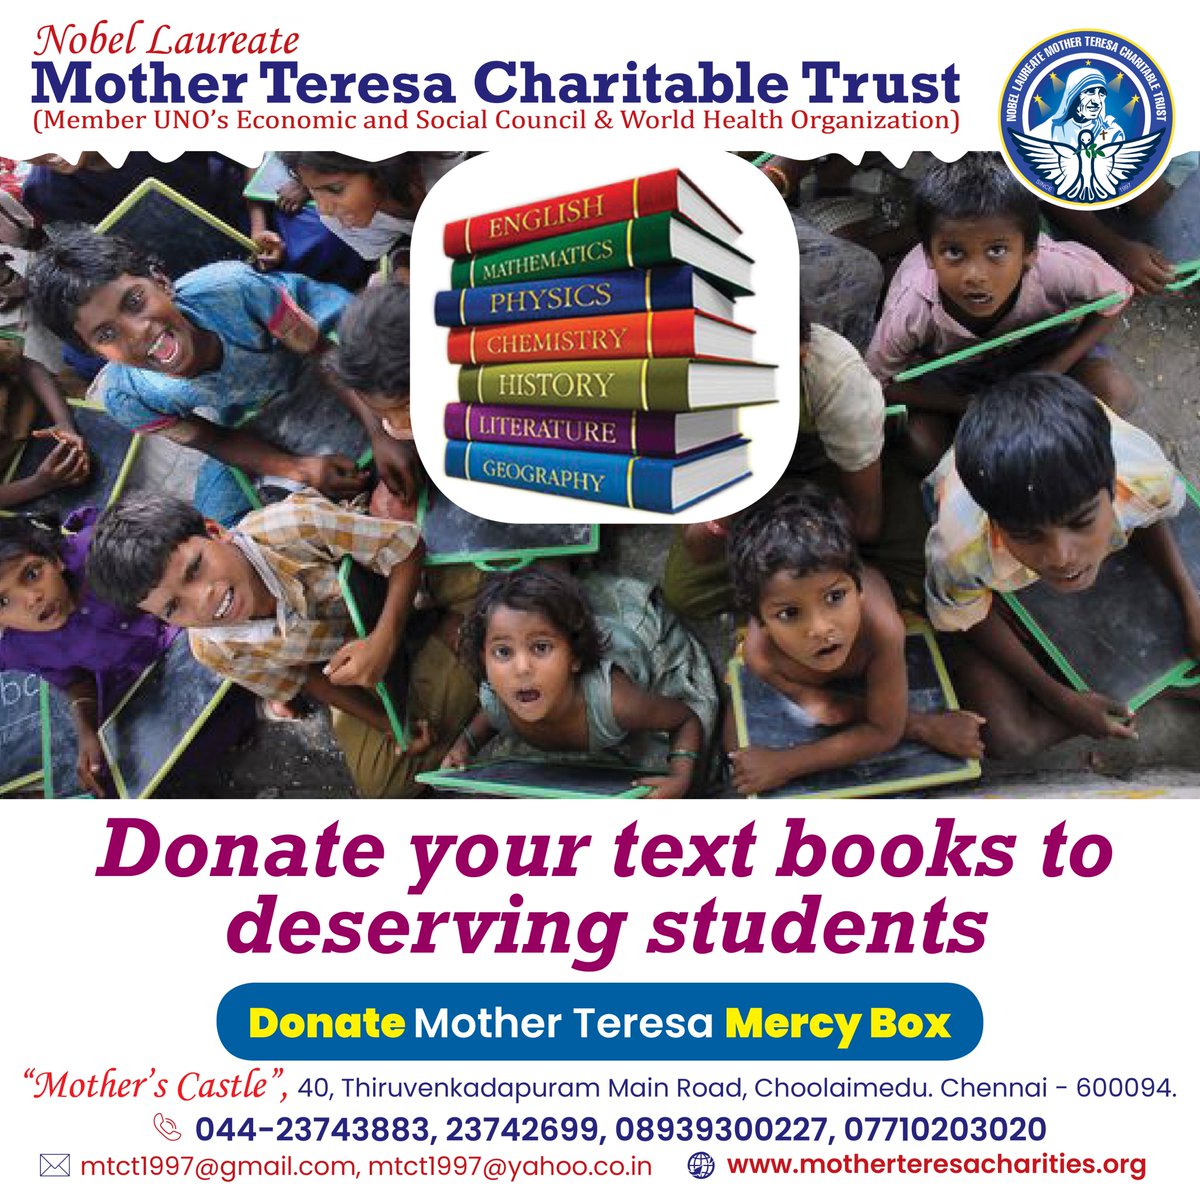 Donate your text books to deserving students
Donate Mother Teresa Mercy Box

For Donations: motherteresacharities.org/donations.php
For Joining: motherteresacharities.org/member.php
For more Info: motherteresacharities.org
#public #textbook #educationbooks #poorchildrens #educationhelp #mtf #educationwelfare